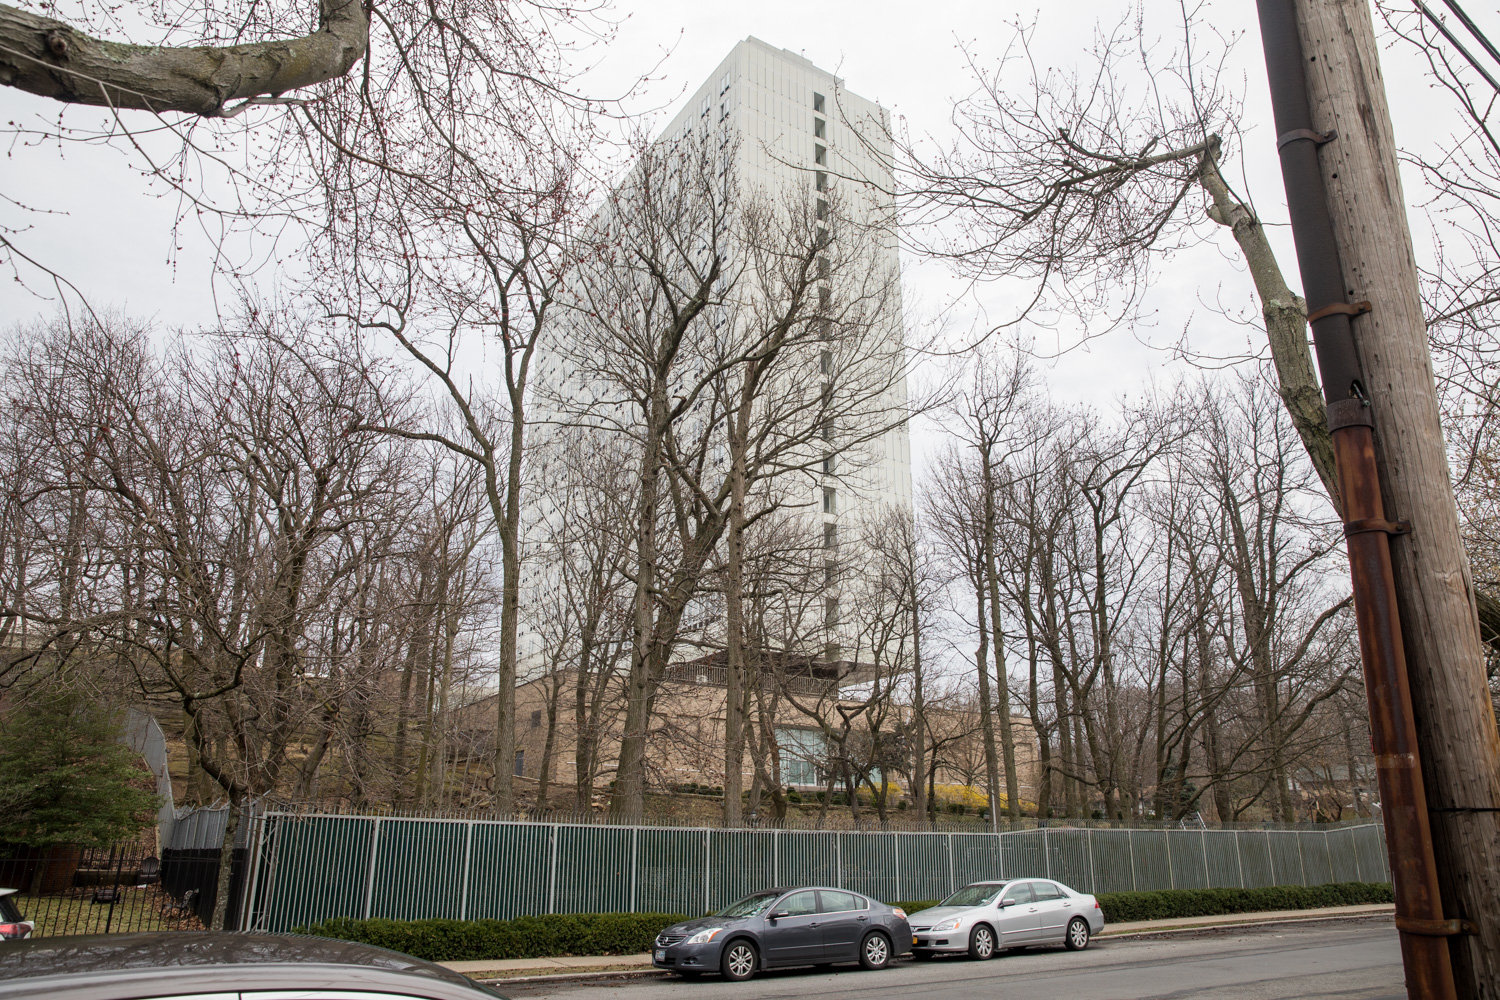 The Russian Mission looms large over Mosholu Avenue. It was built by the Soviet Union from the top down in 1974.